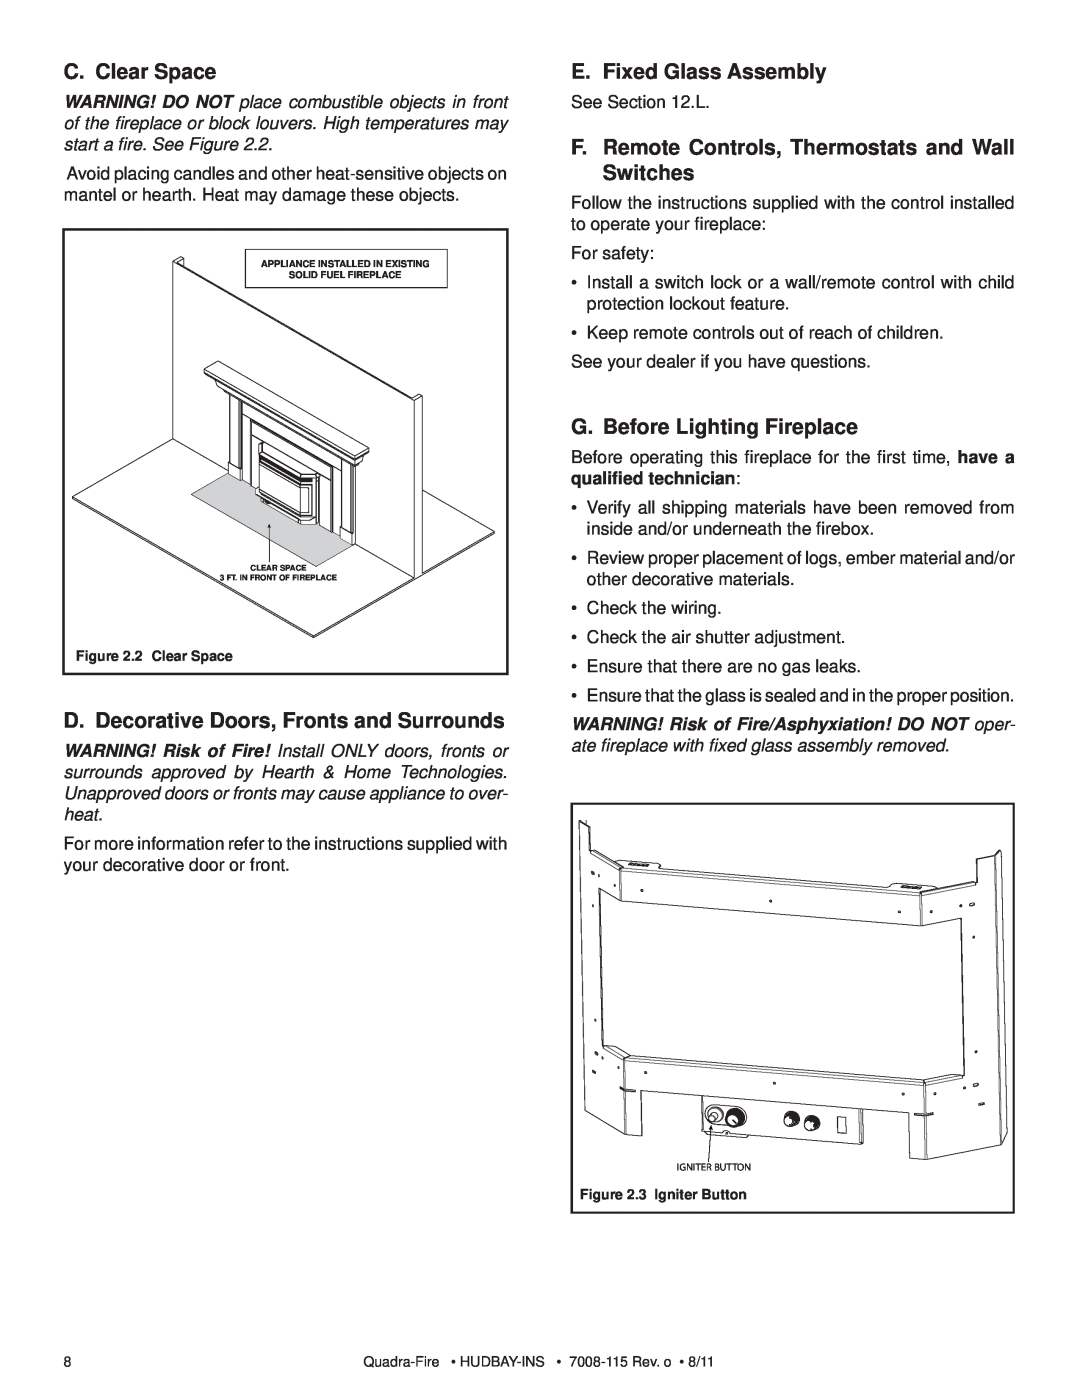 Quadra-Fire 7008-115 owner manual C. Clear Space, D. Decorative Doors, Fronts and Surrounds, E. Fixed Glass Assembly 